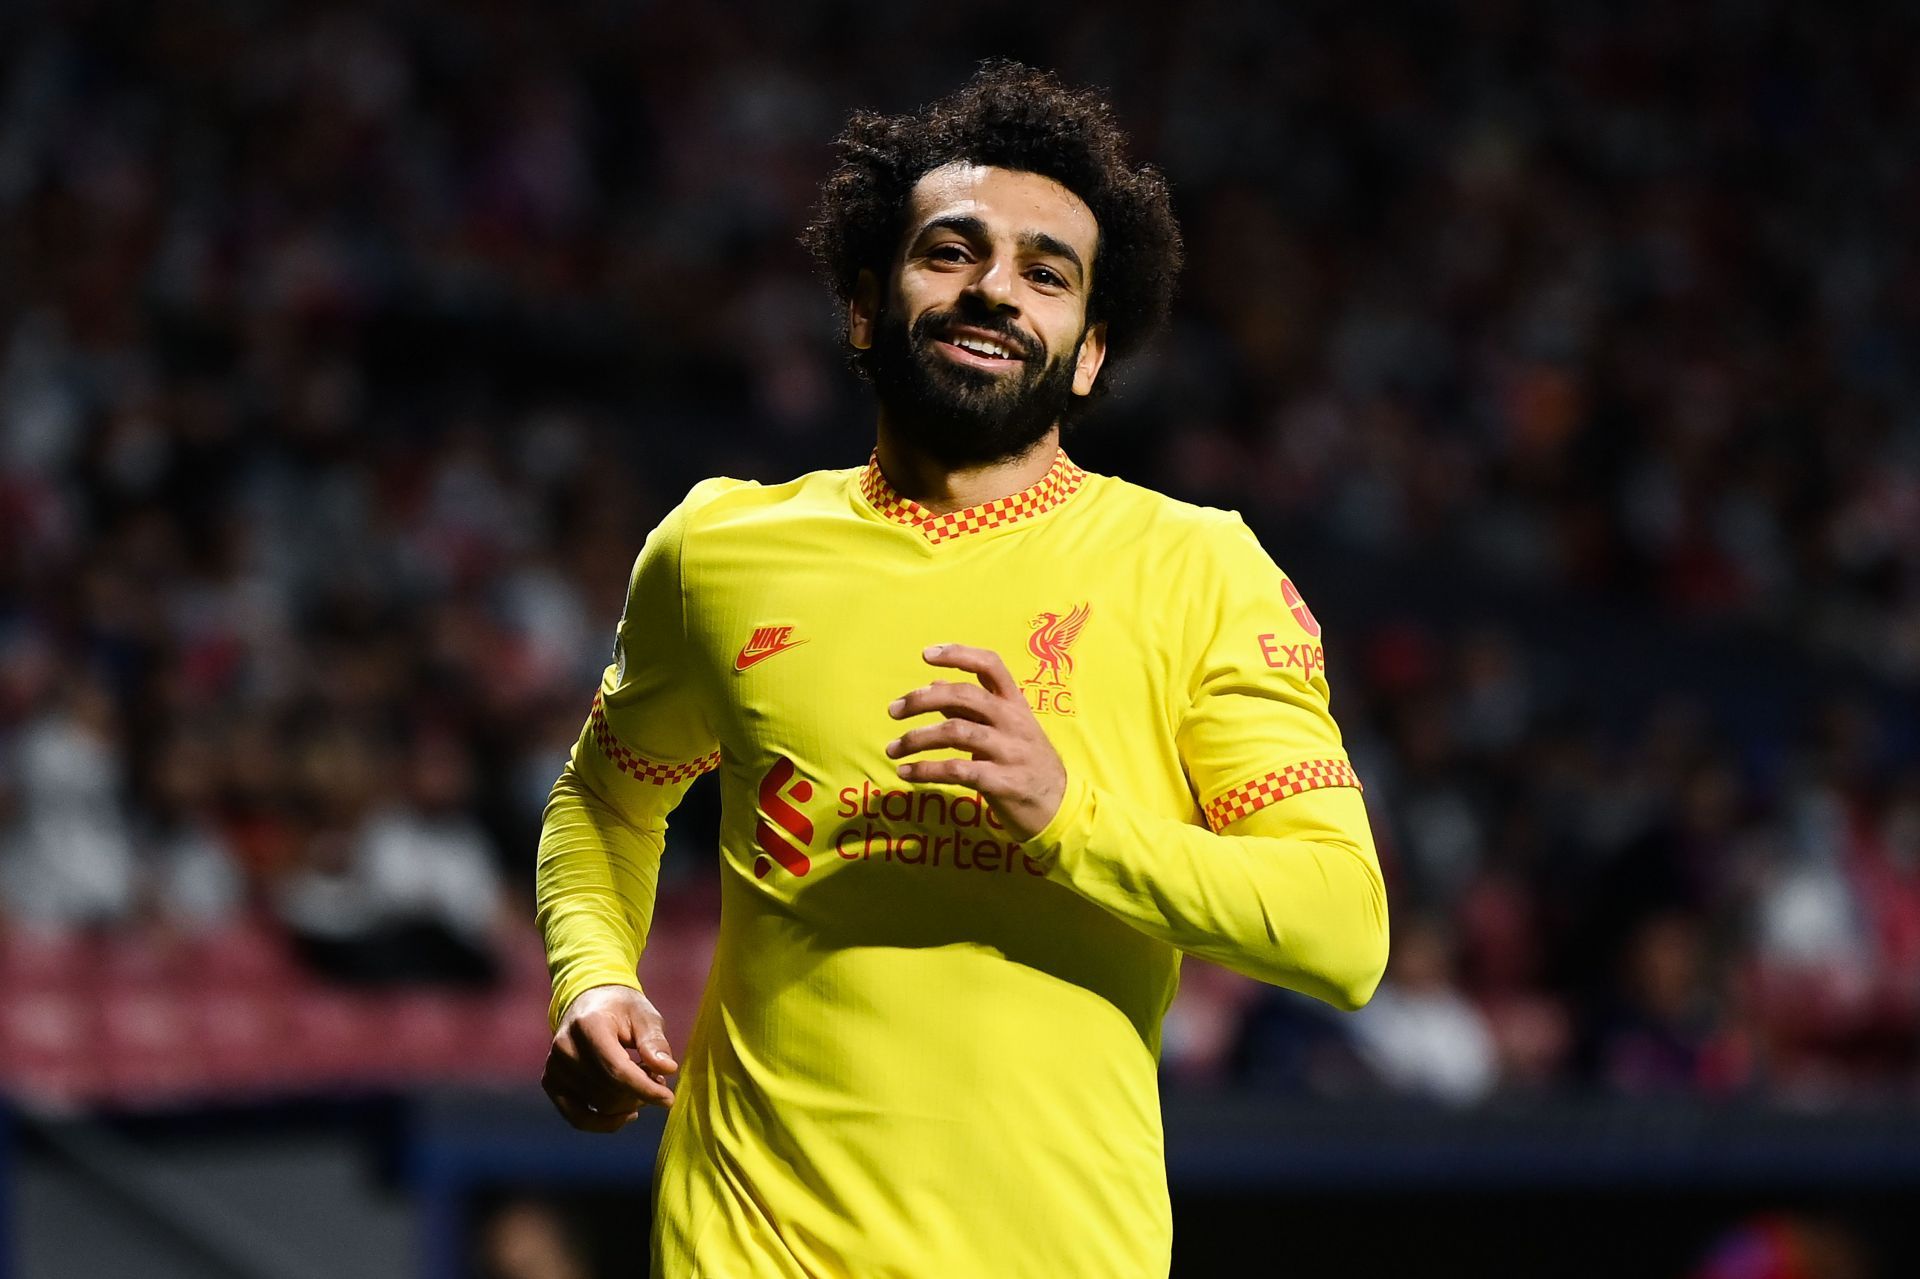 Mo Salah is arguably the most in form player in the world right now